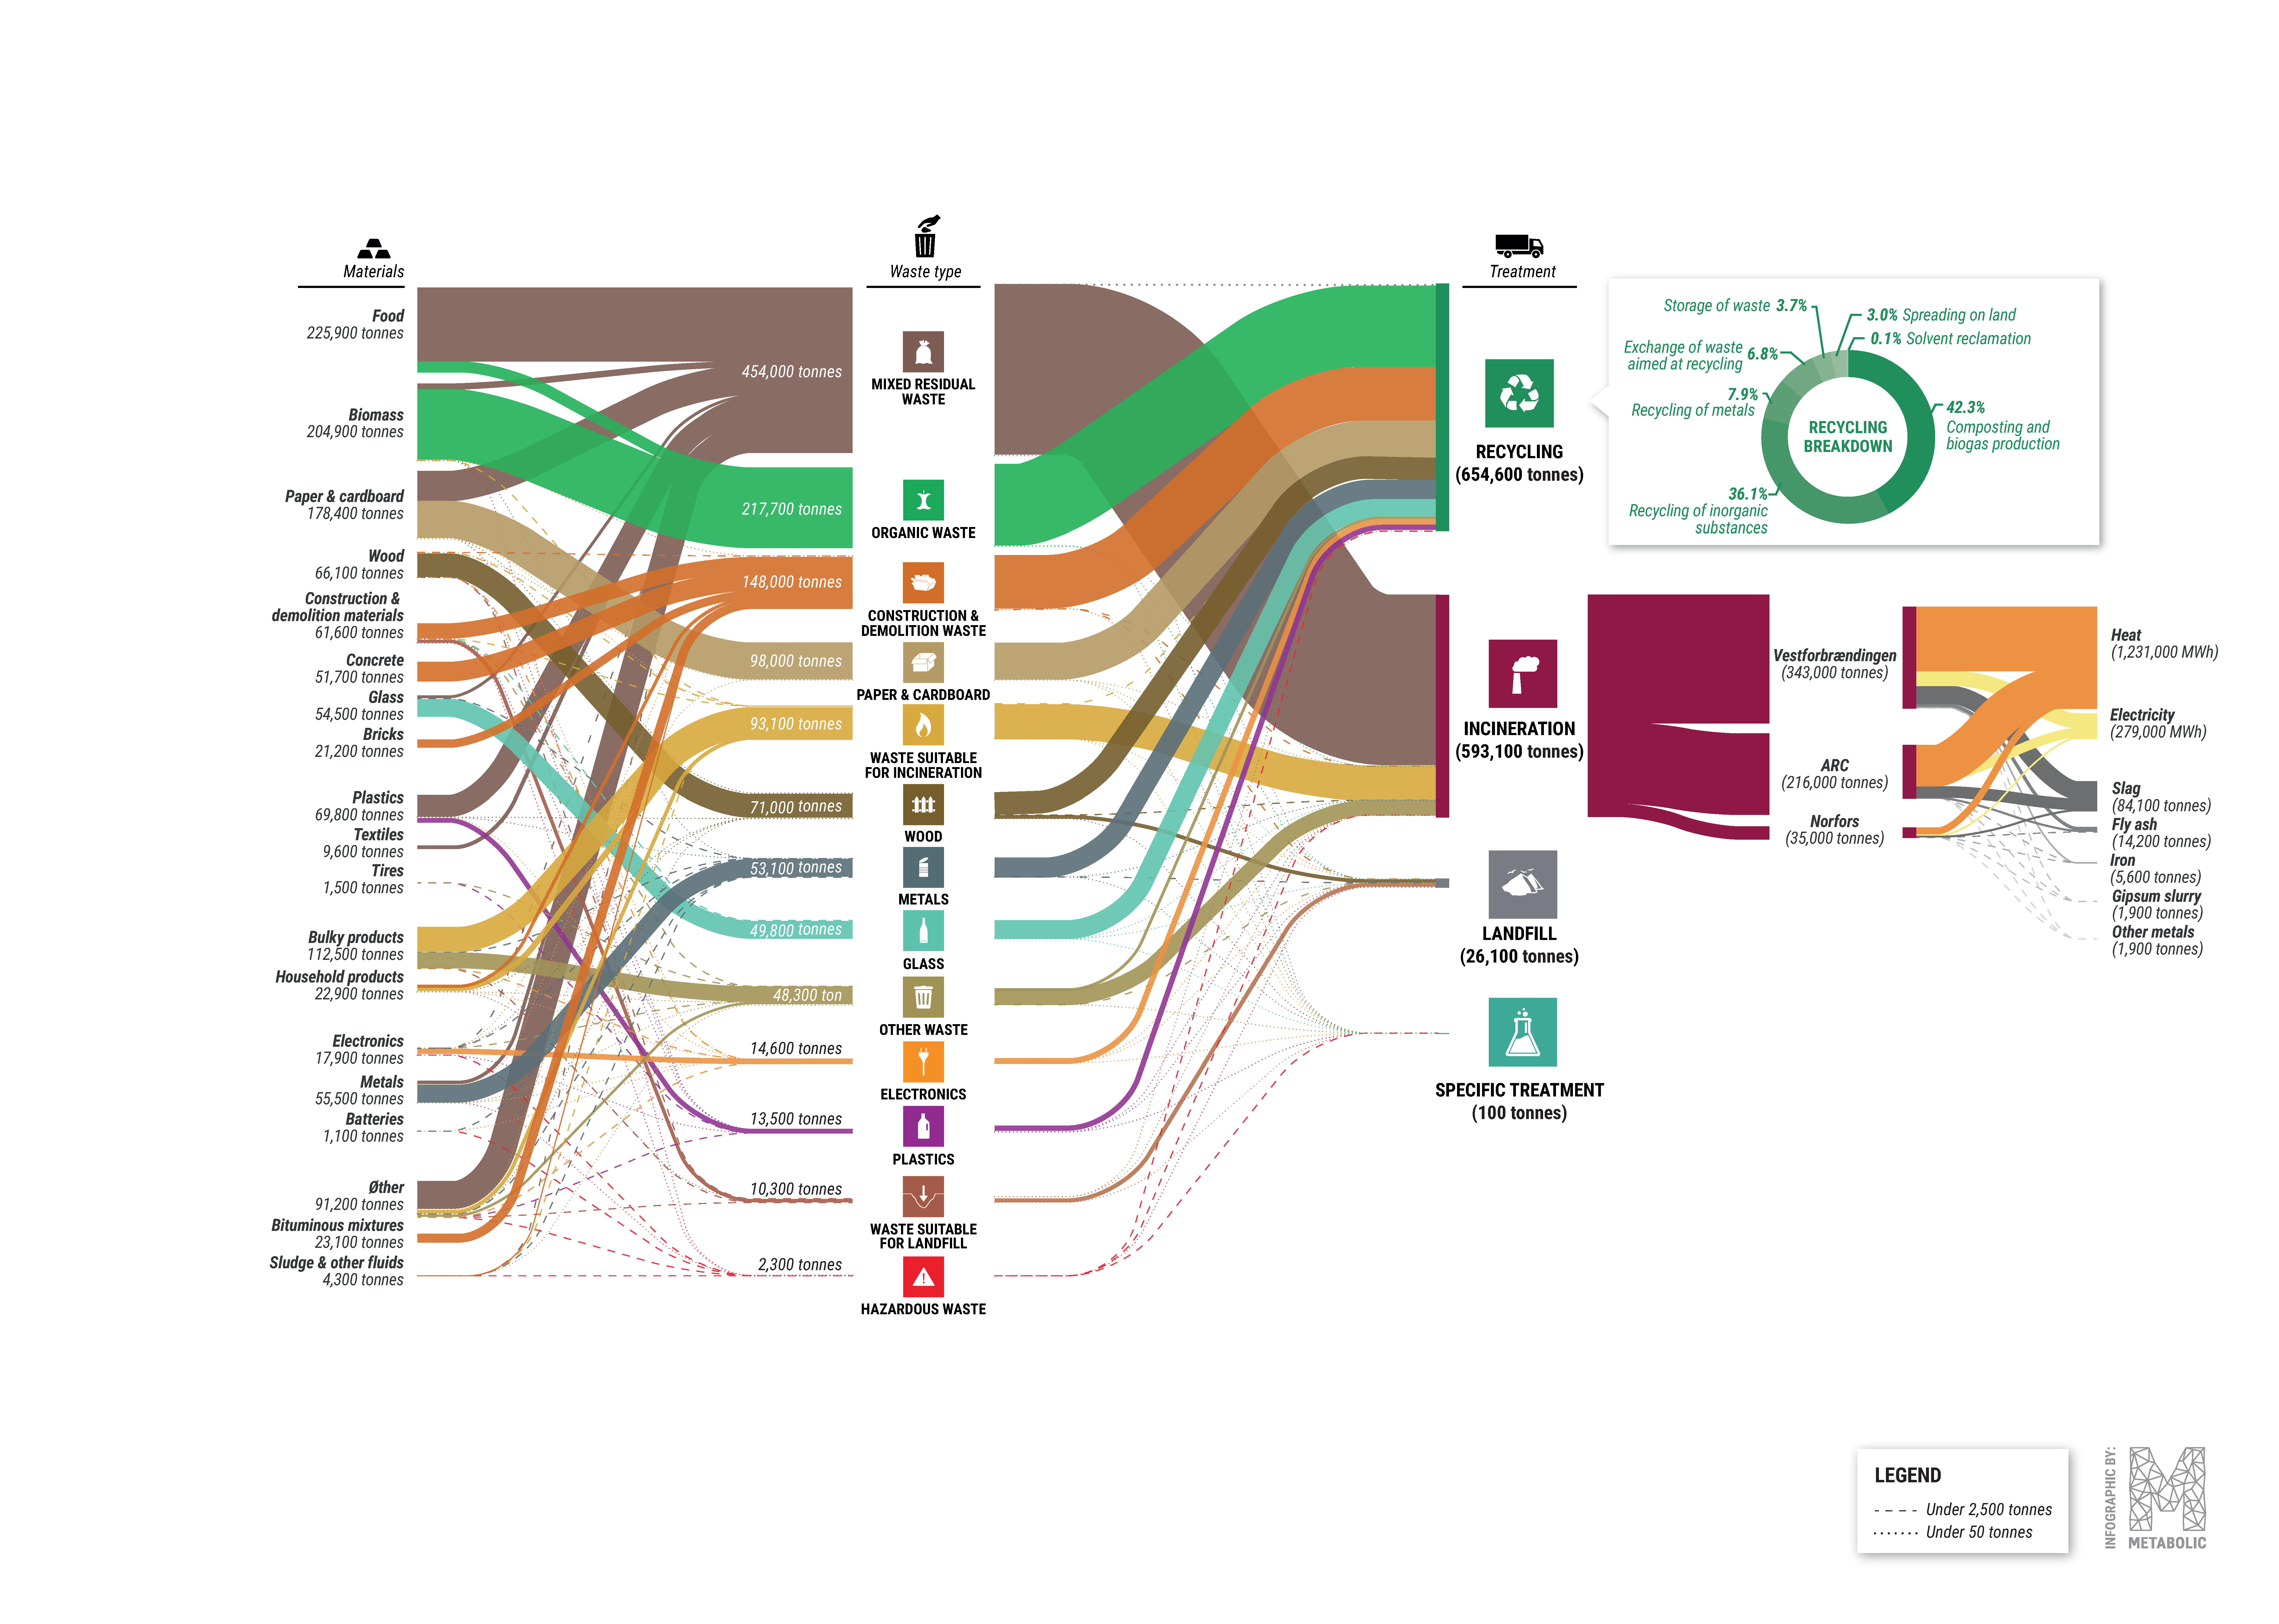 Sankey diagram of waste streams from households in the Capital Region. 2016, tonnes.